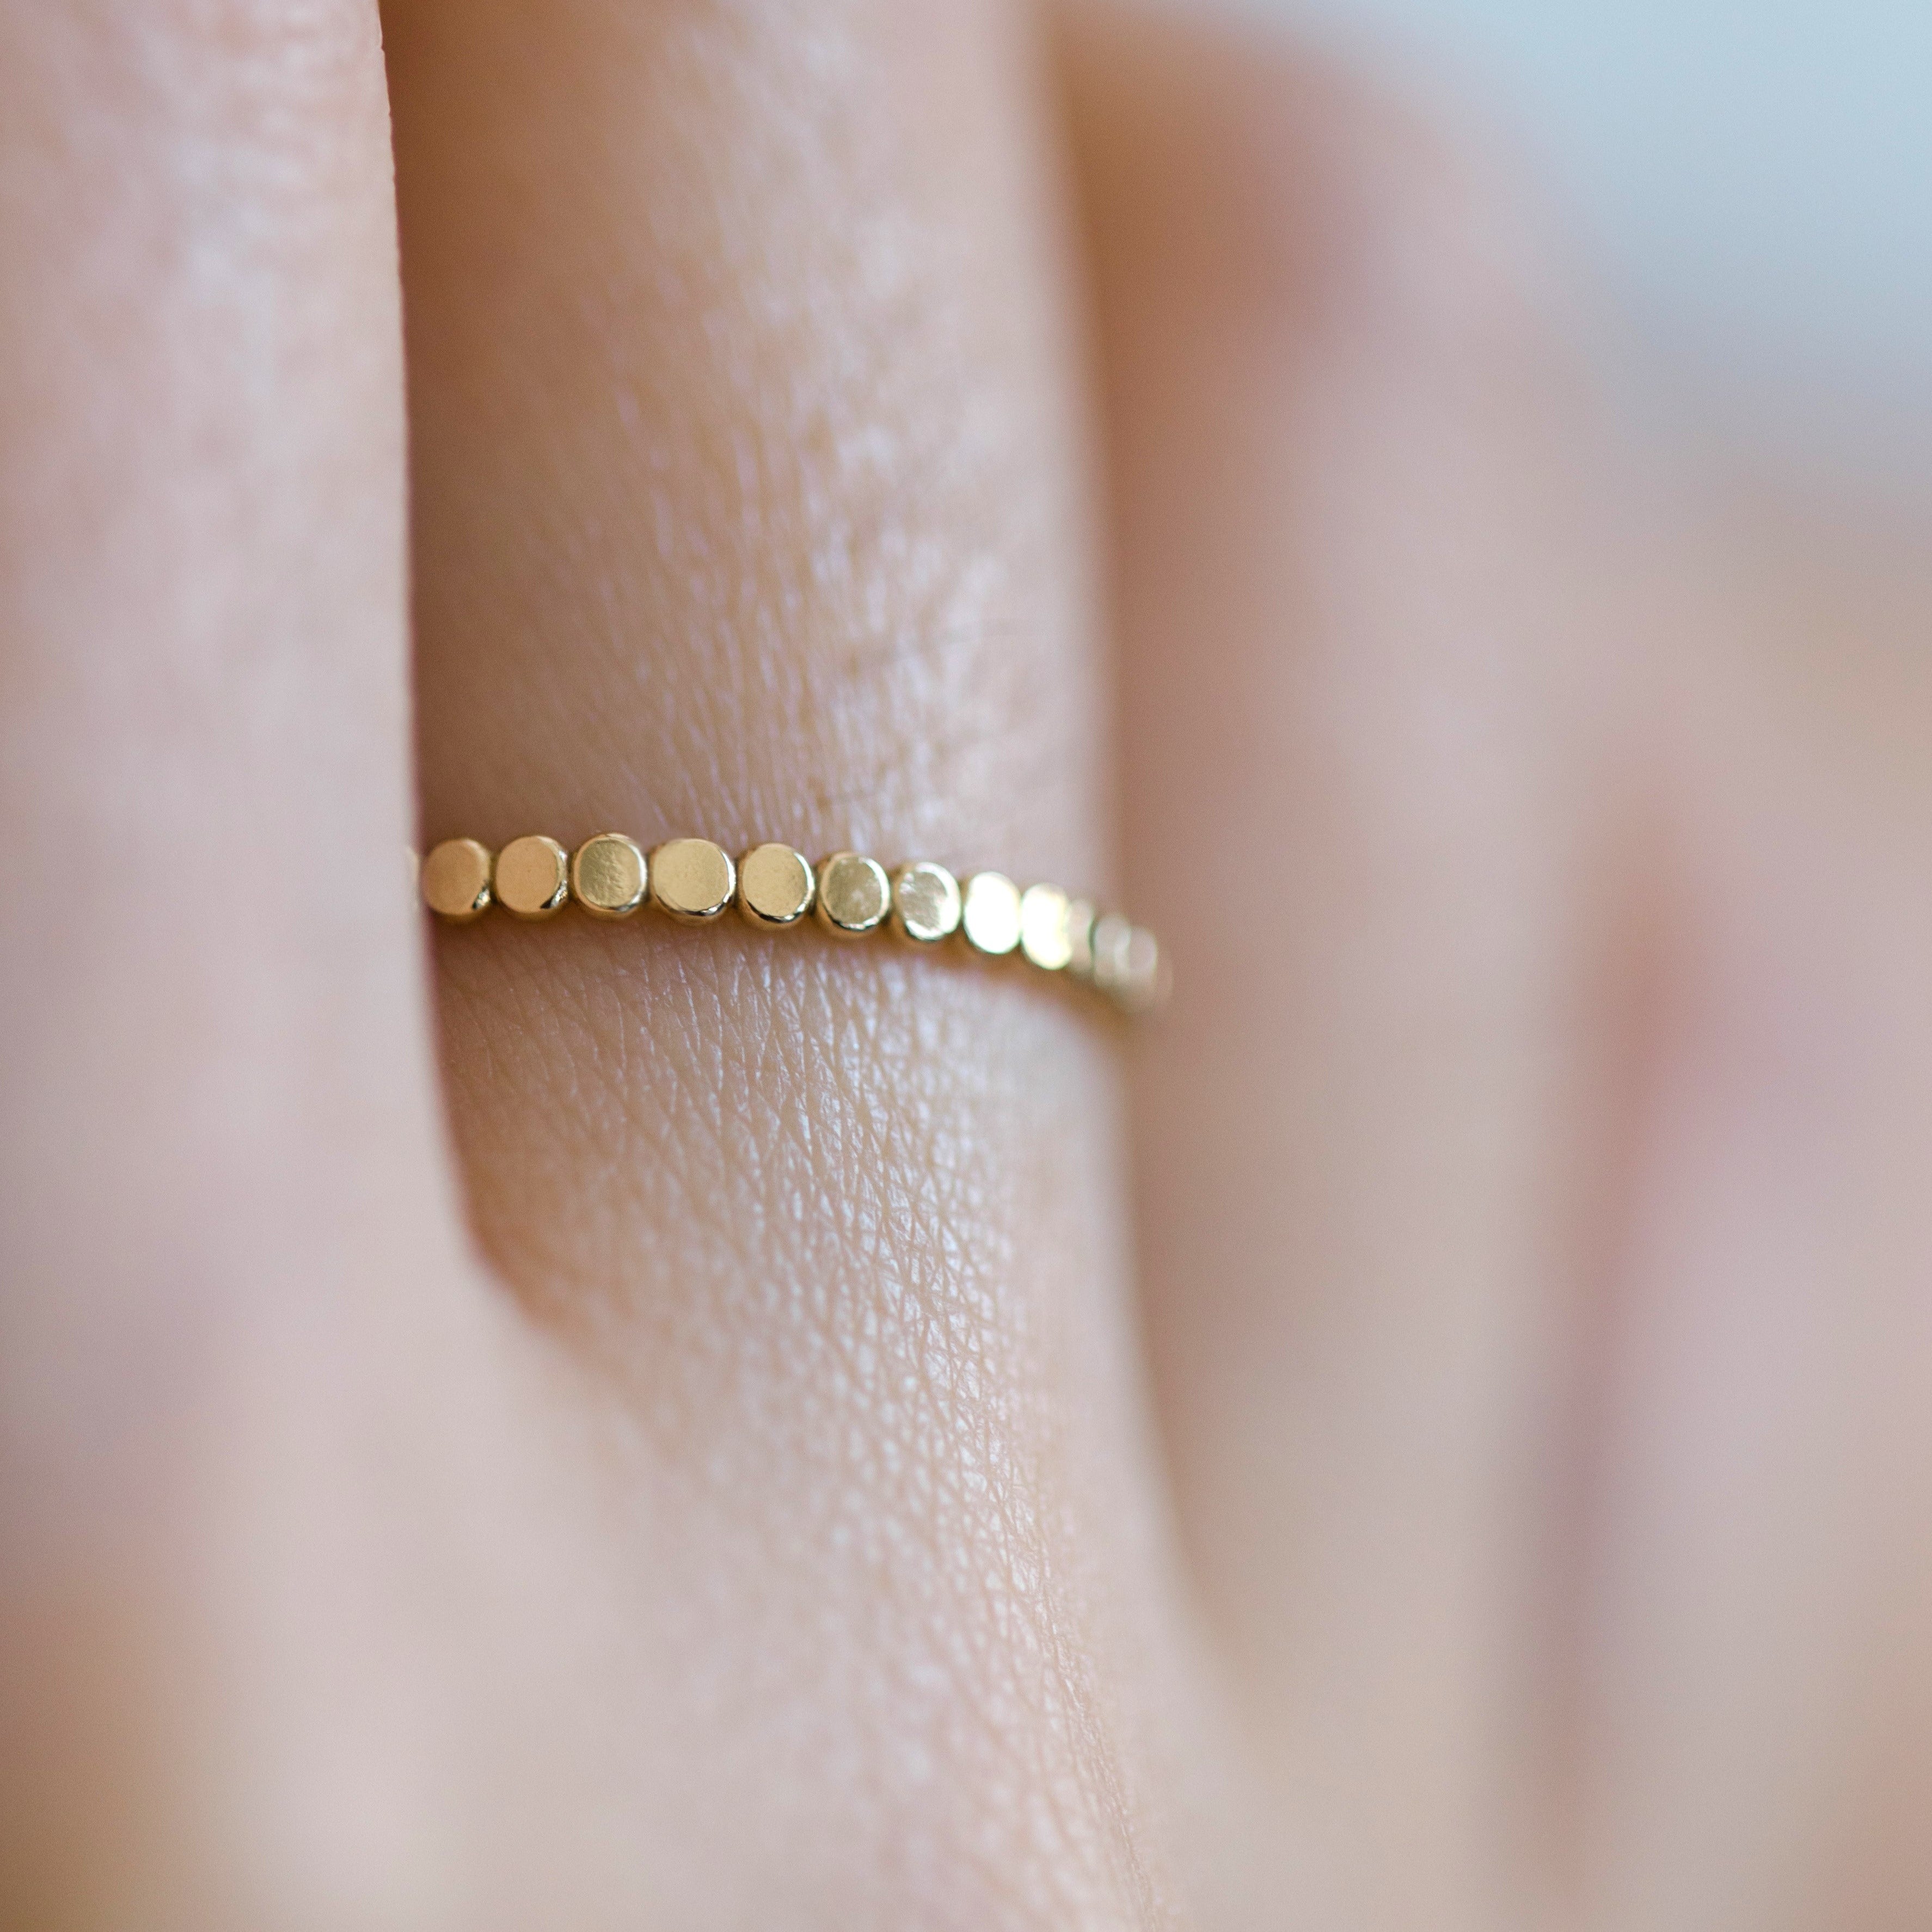 Slim gold band made with tiny dot pattern. The pattern wraps around the entire ring. Beautiful alone or stacked with other gold rings.